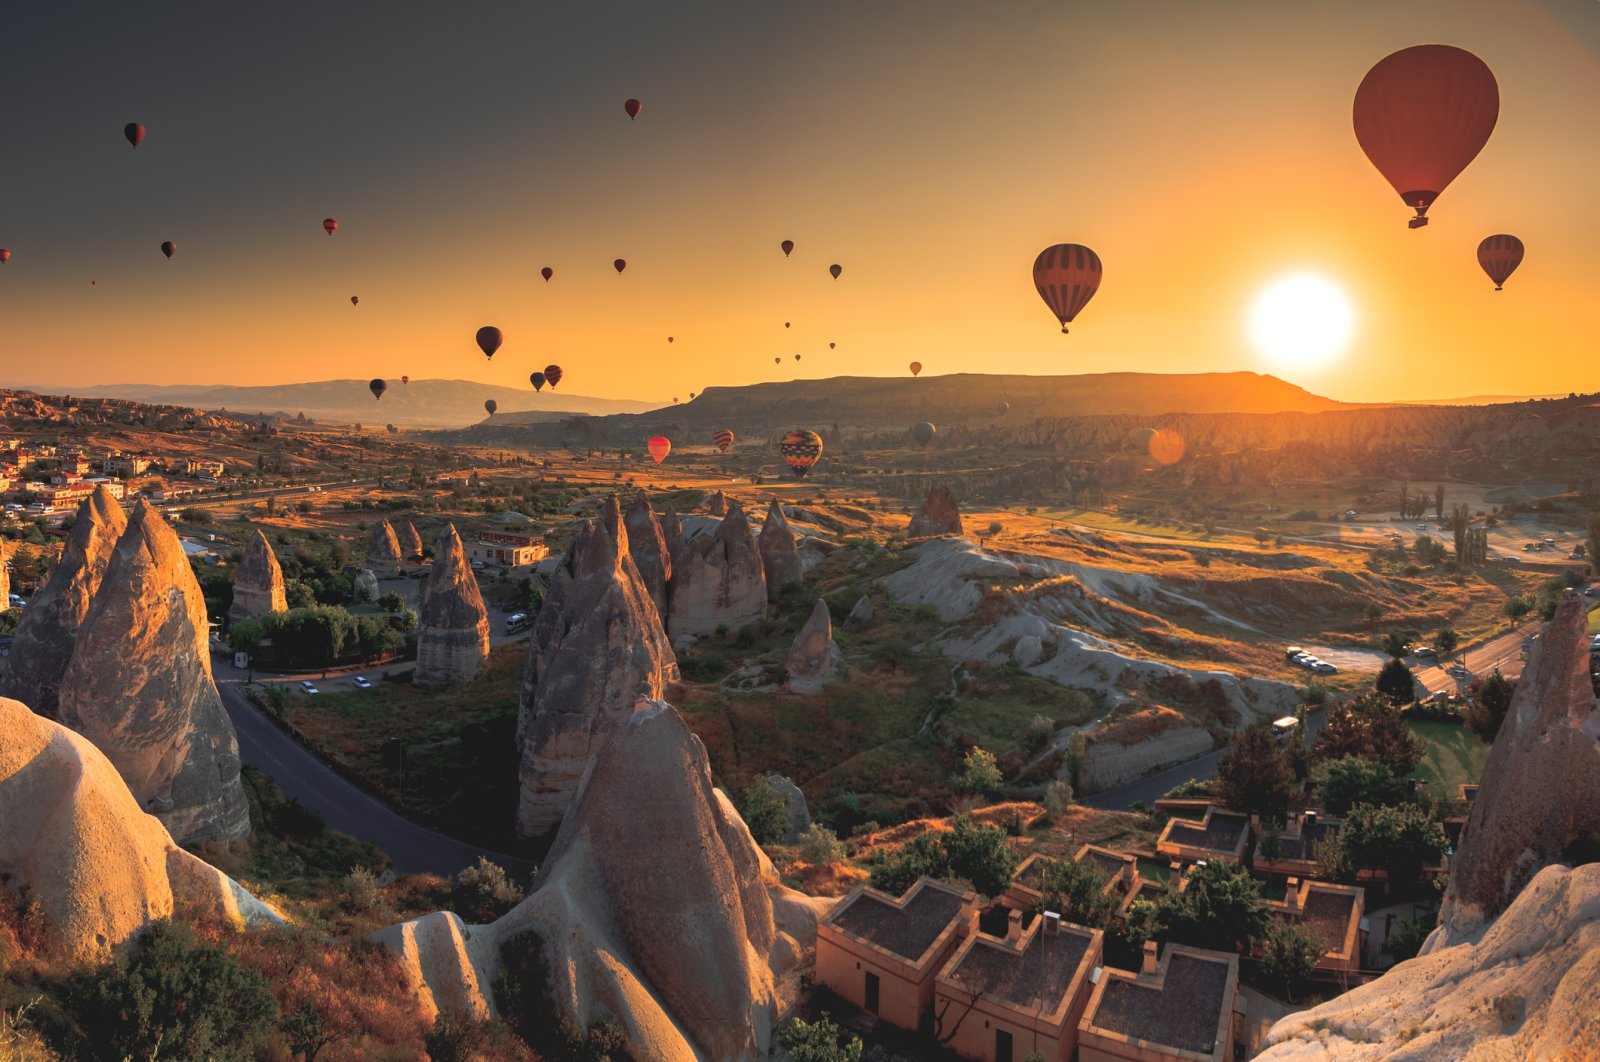 The first edition of the Cappadocia Film Festival was scheduled for May 29 to June 3, 2020. (iStock Photo)